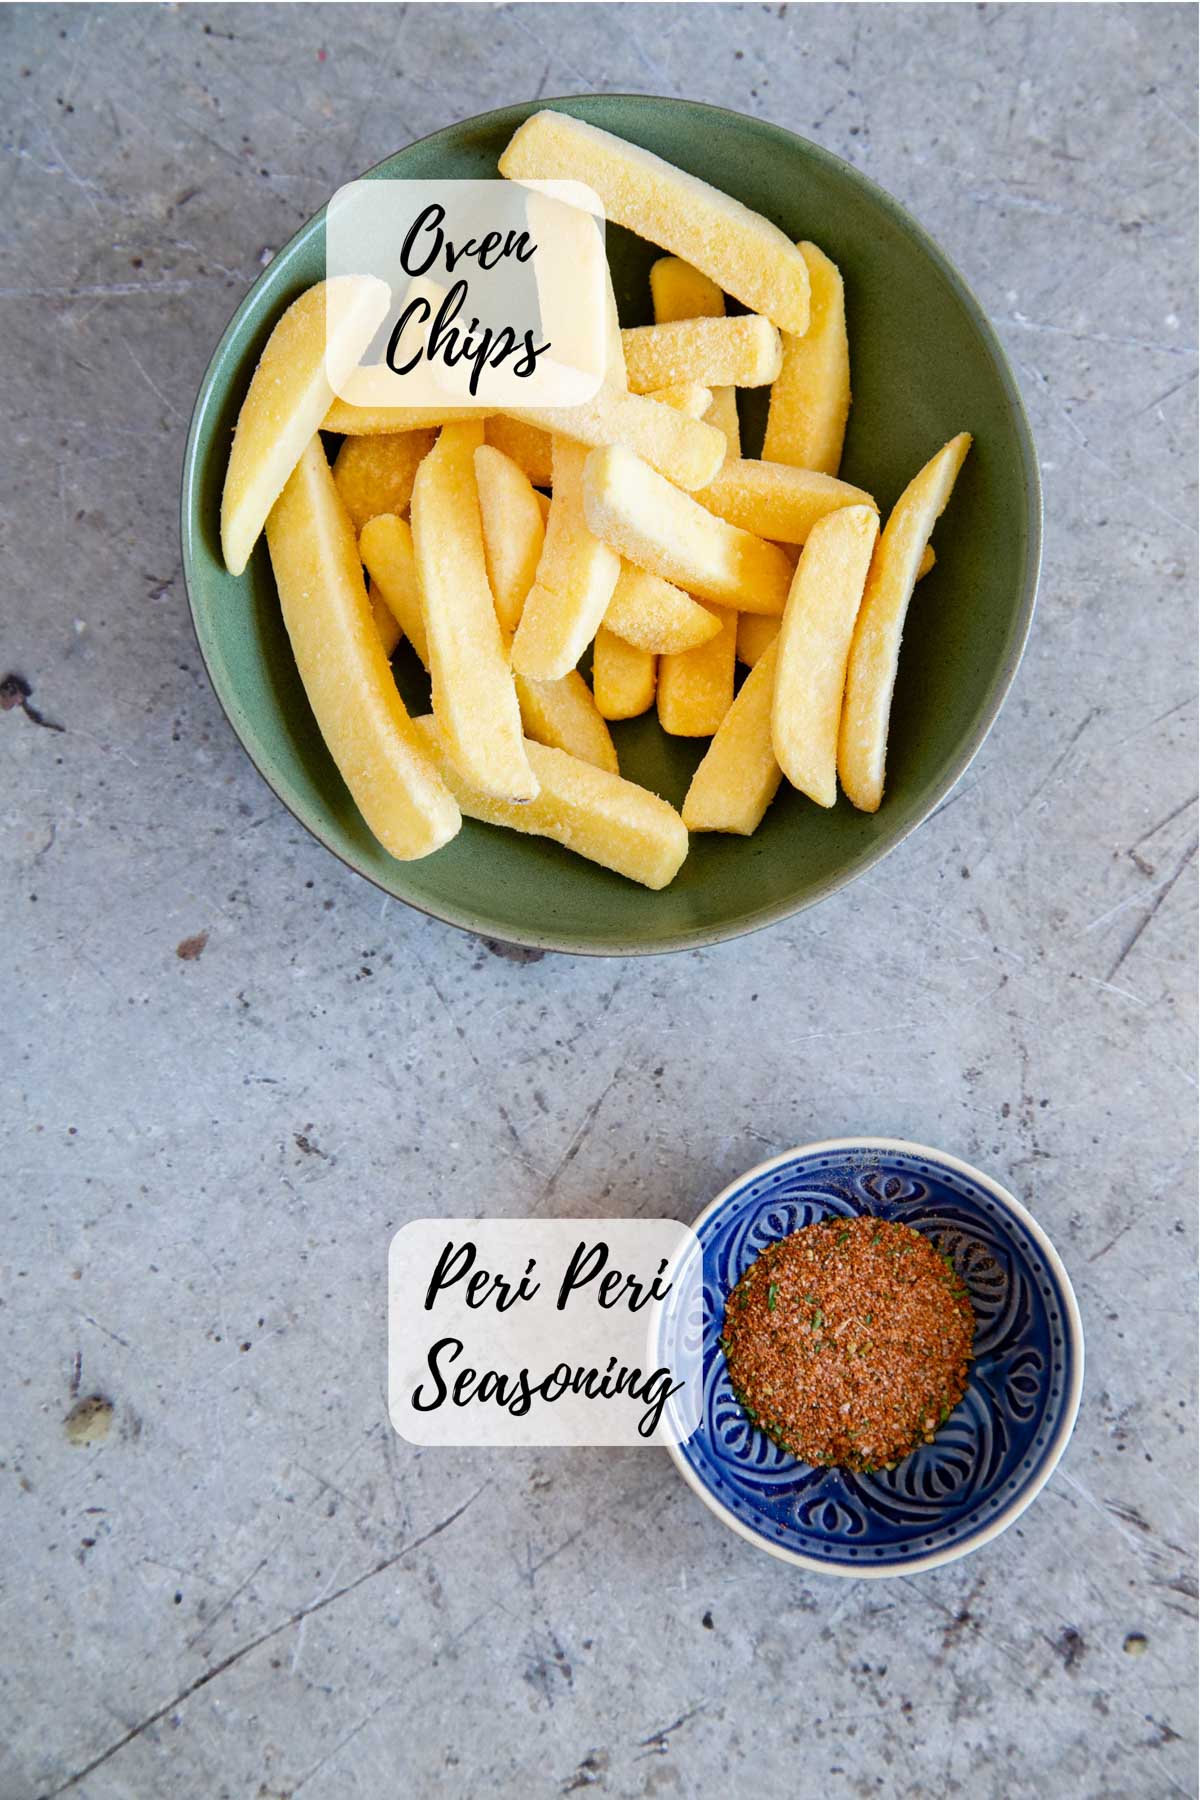 All you need for peri peri fries - frozen oven chips and peri peri seasoning